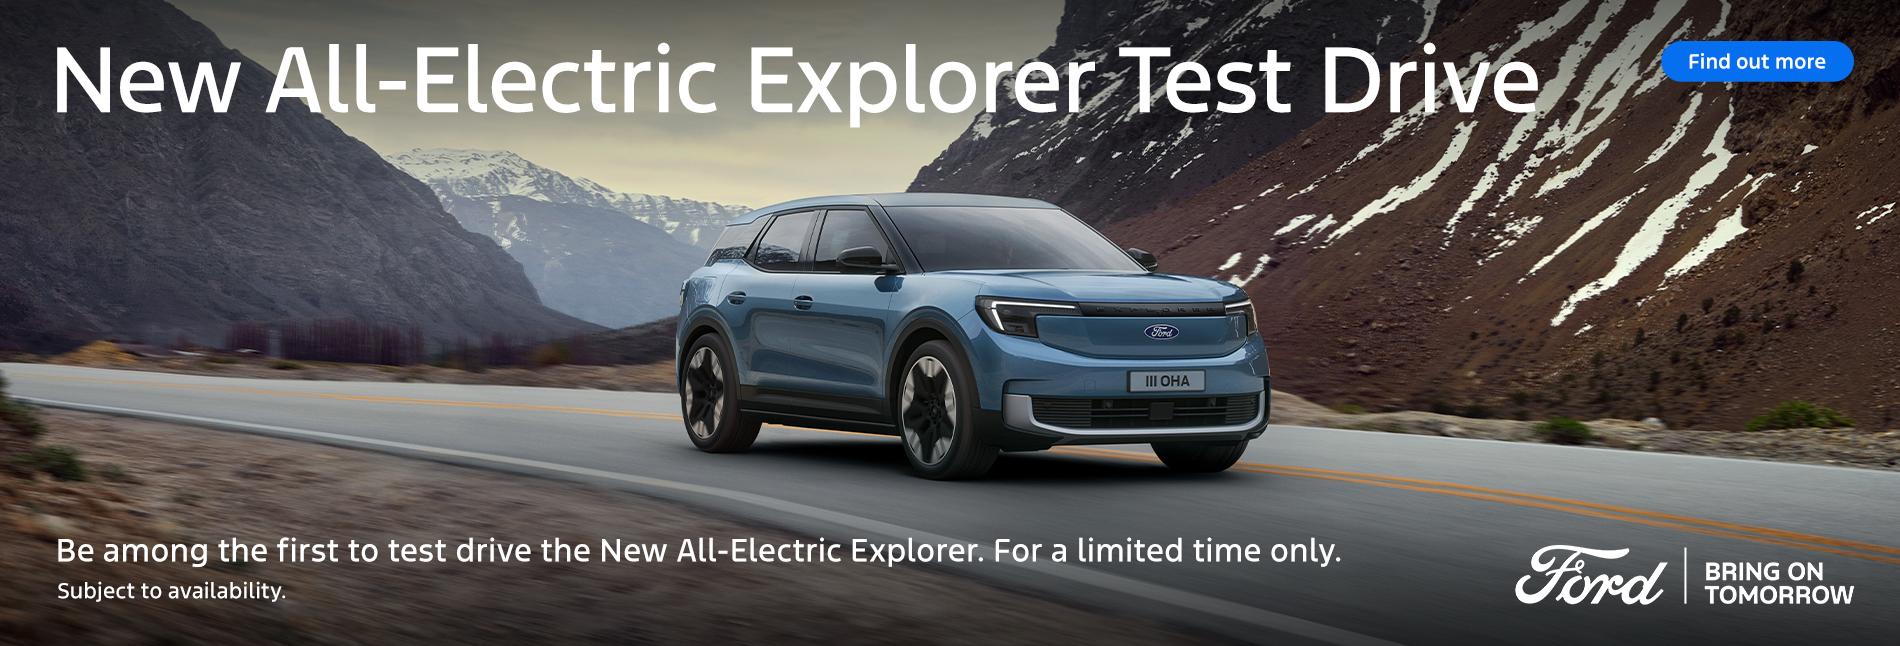 Ford All-Electric Explorer Test Drive Event